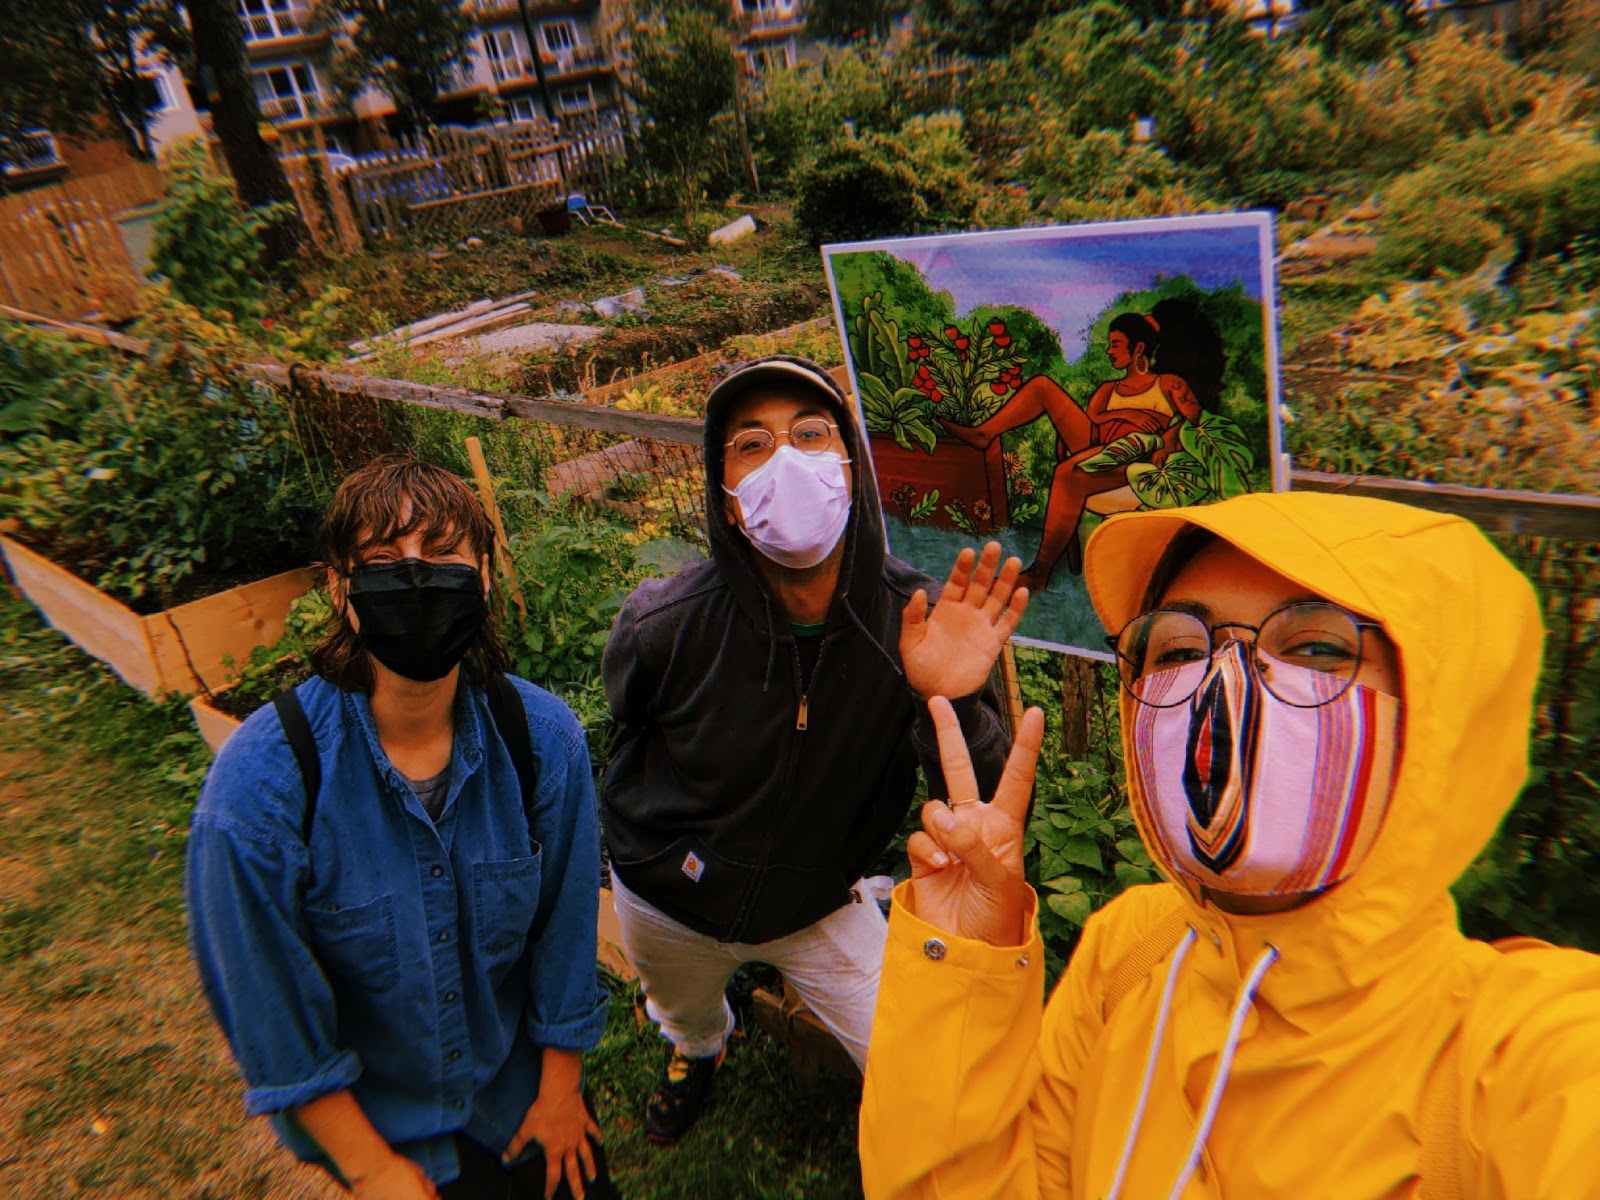 three people (Vivienne, Derya, and Zion) posed besides a painting inside a community garden